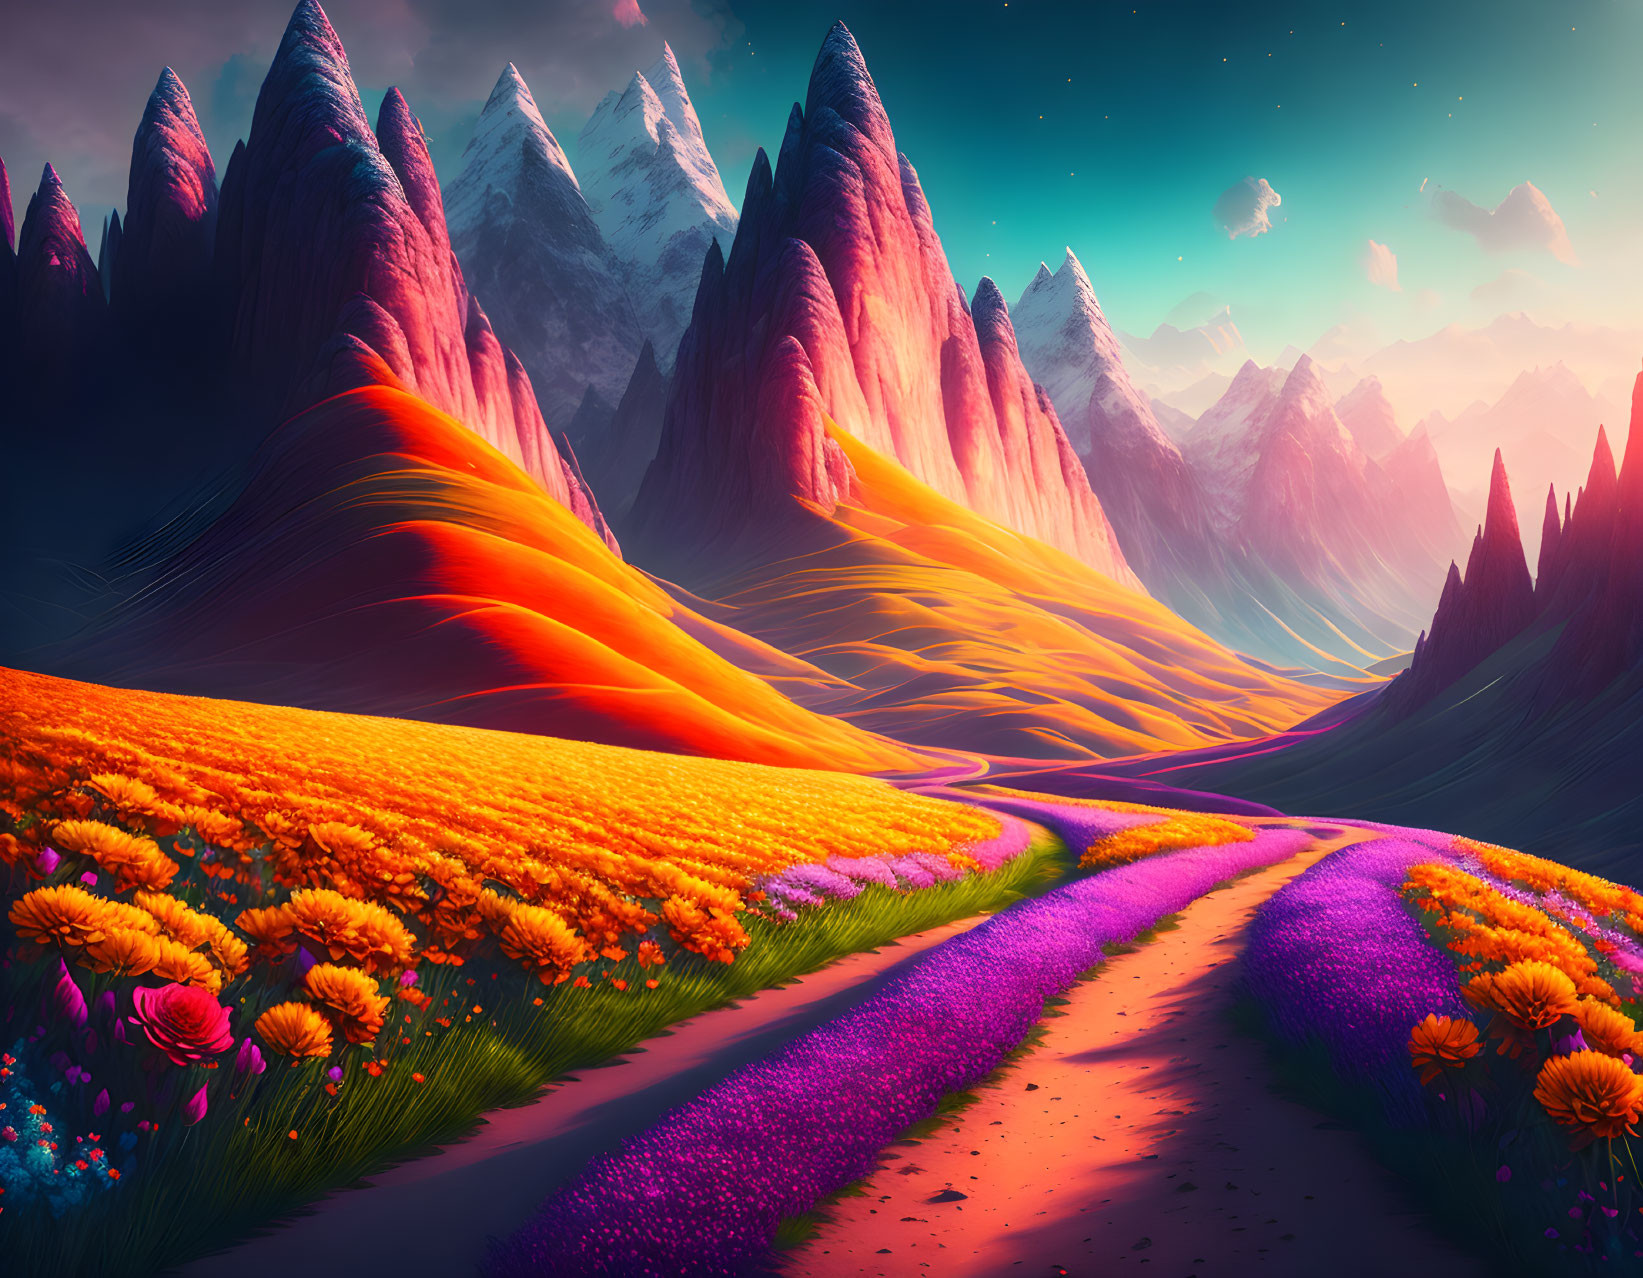 Colorful Path Through Orange and Purple Flower Fields with Snowy Peaks - Twilight Sky Landscape